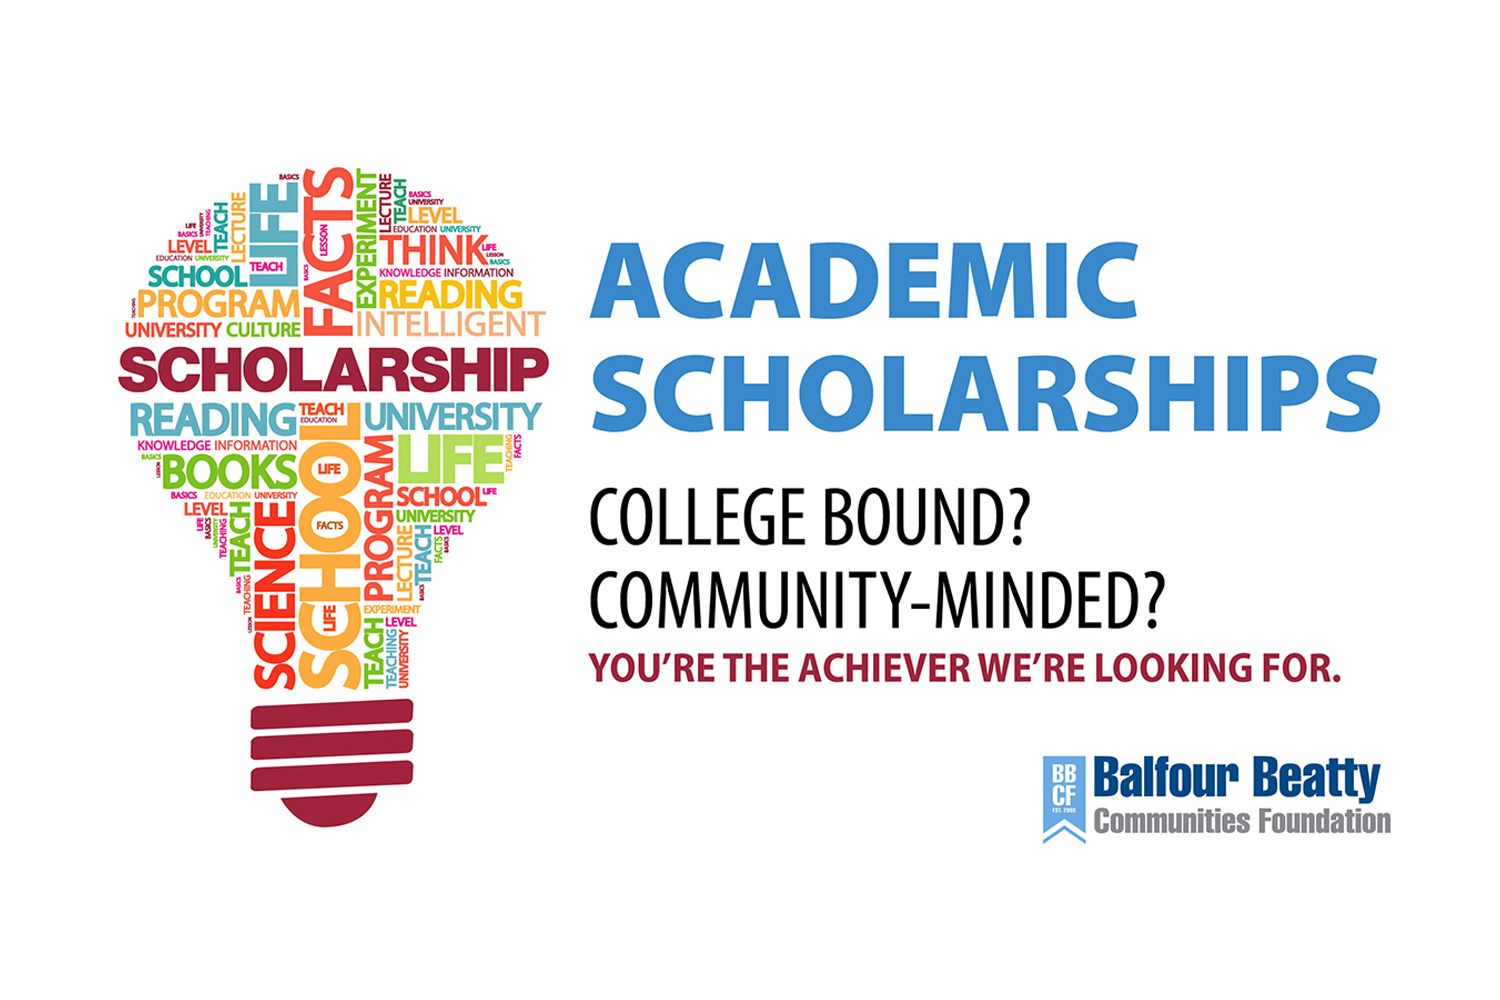 Balfour Beatty Communities Foundation accepting applications for annual scholarship program